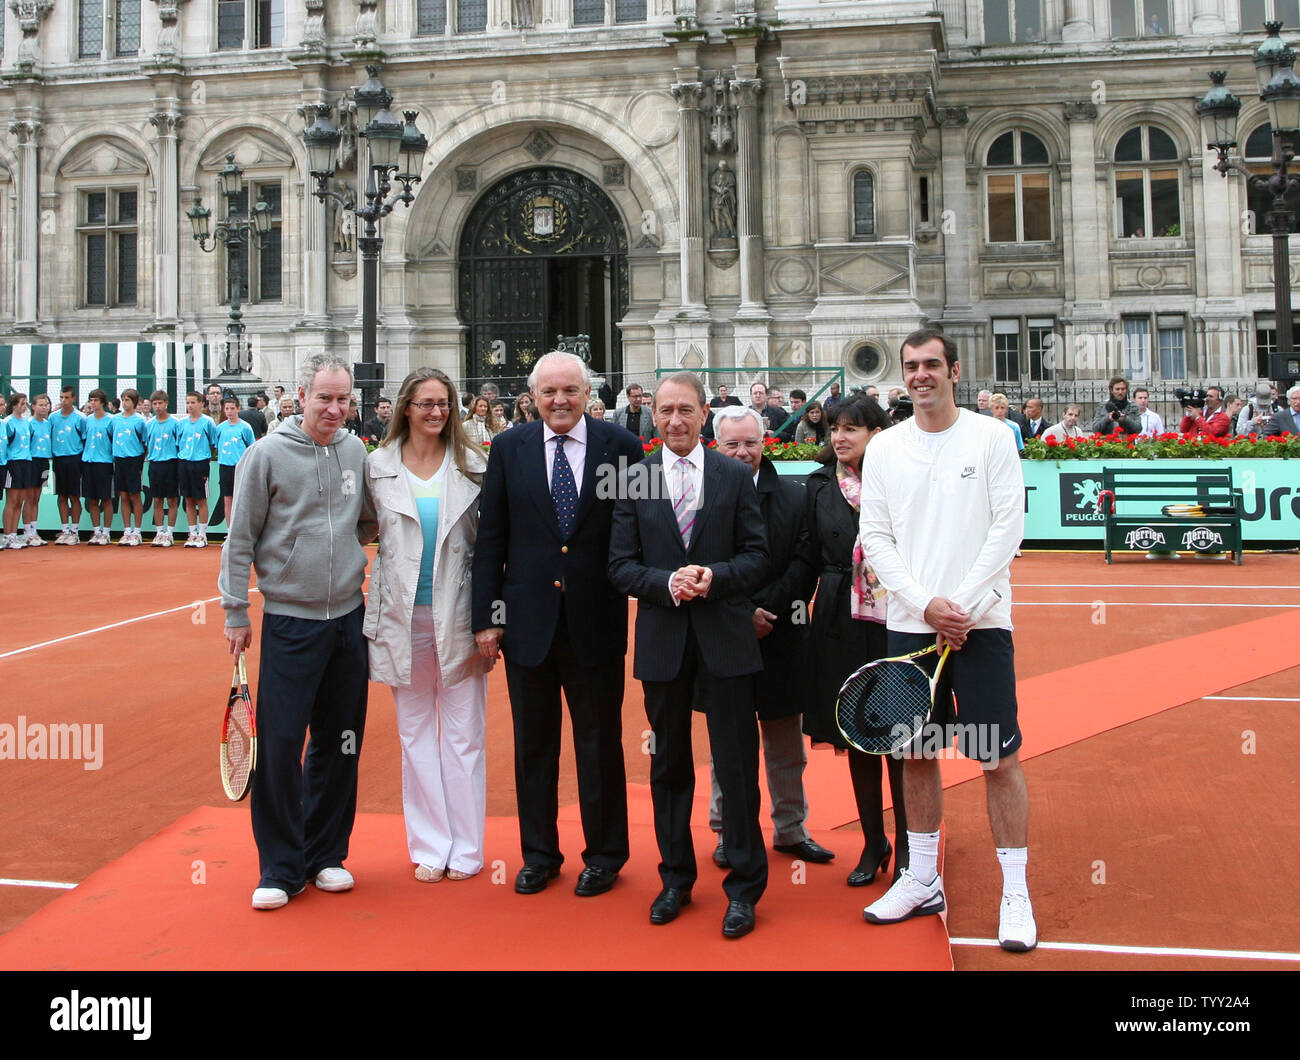 (From L to R) Tennis greats John McEnroe and Mary Pierce, President of the French Tennis Federation Christian Bimes, Mayor of Paris Bertrand Delanoe, unidentified and tennis great Cedric Pioline arrive on a clay court set up in front of the Hotel de Ville (city hall) during the launch of the exhibition 'Roland Garros in the City' in Paris on June 4, 2008.  The event coincides with the French Open tennis tournament taking place this week in Paris.   (UPI Photo/ David Silpa) Stock Photo